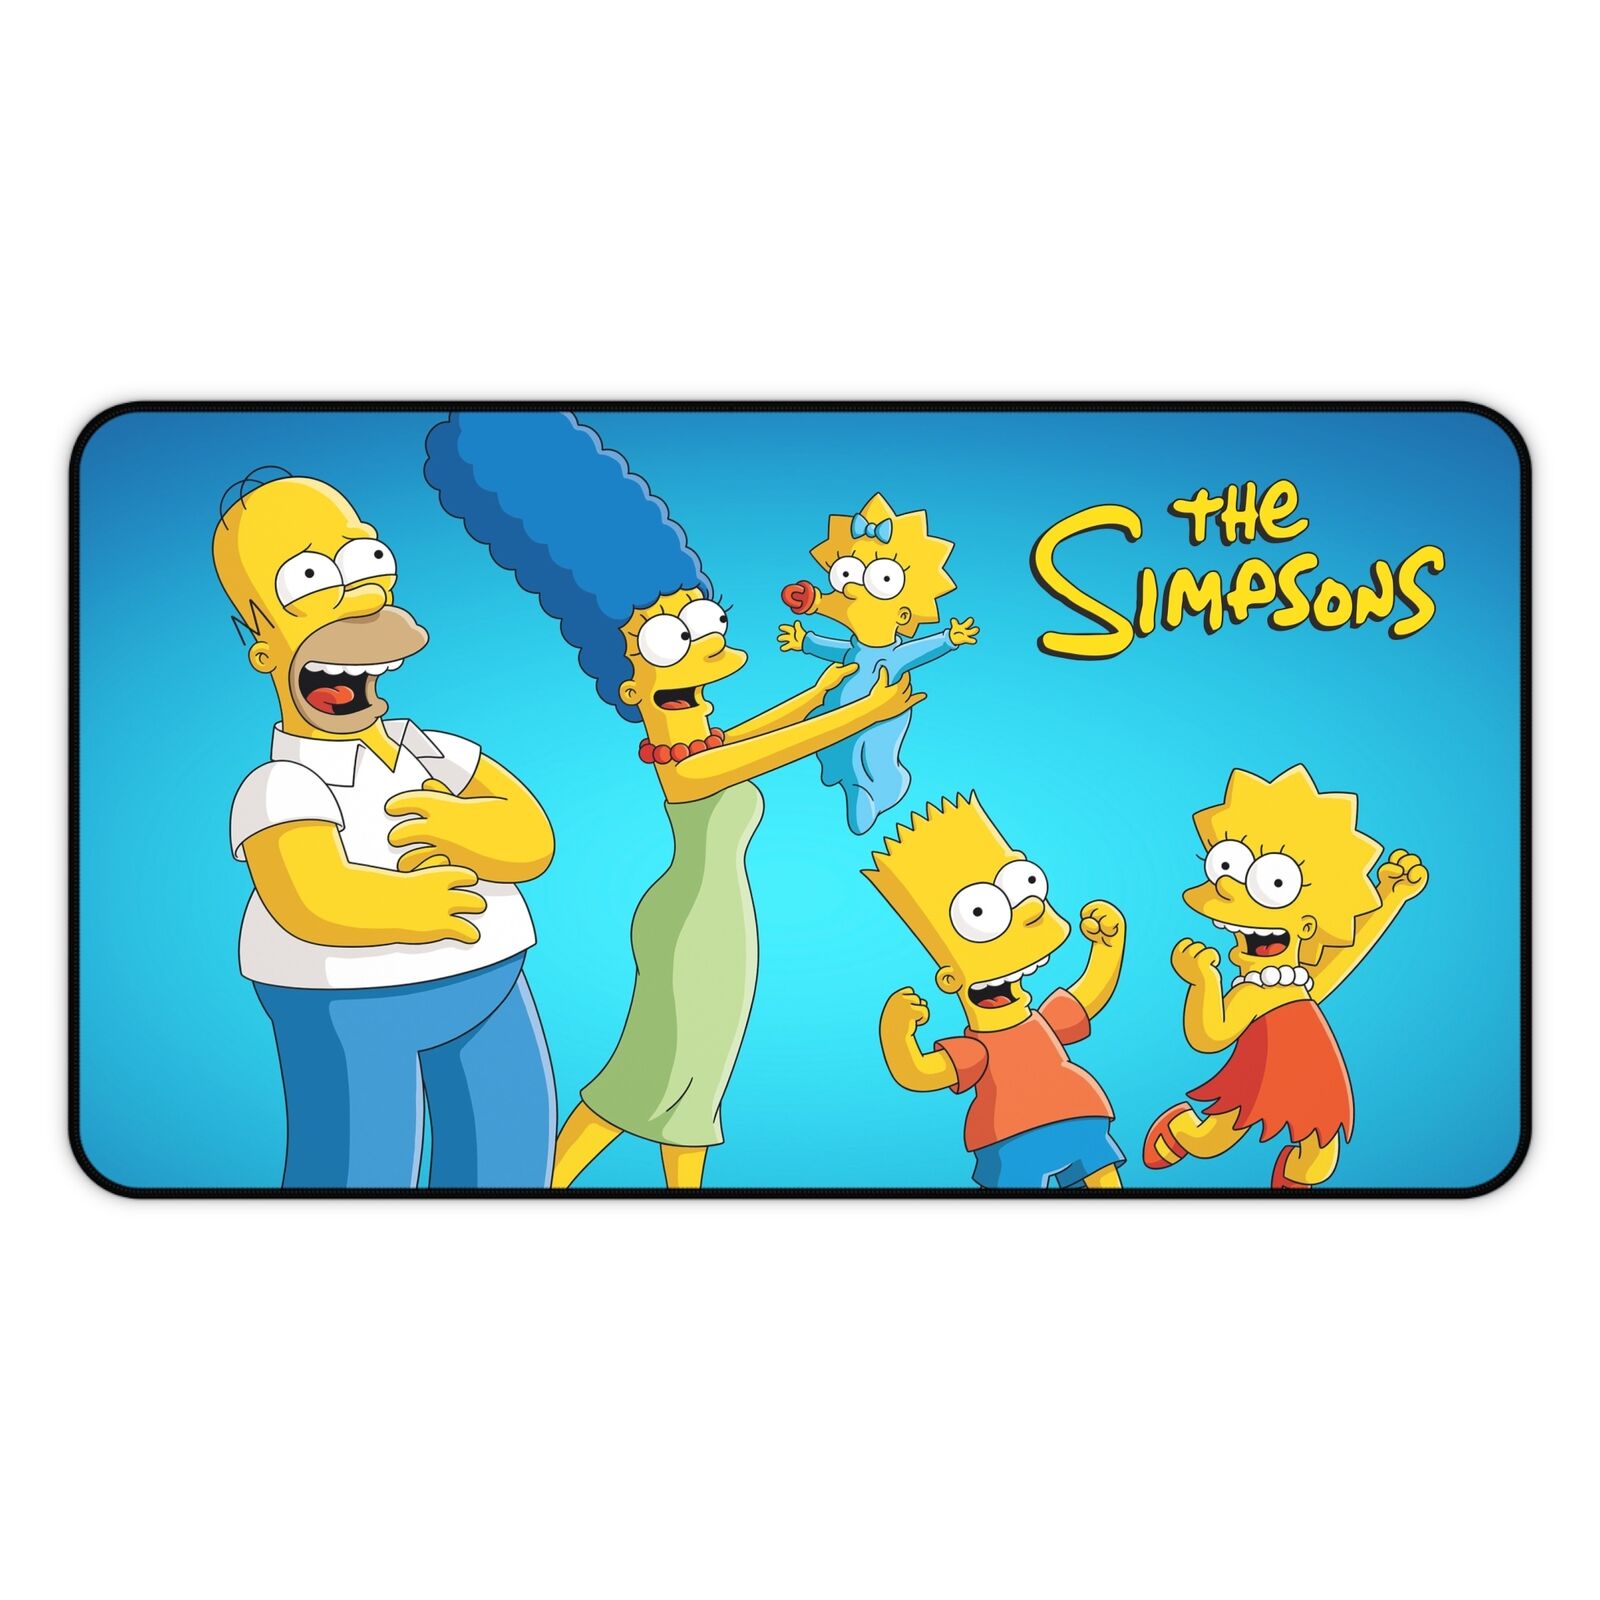 The Simpsons - Happy Family - Multiple Sizes - Desk Mat Mouse Pad